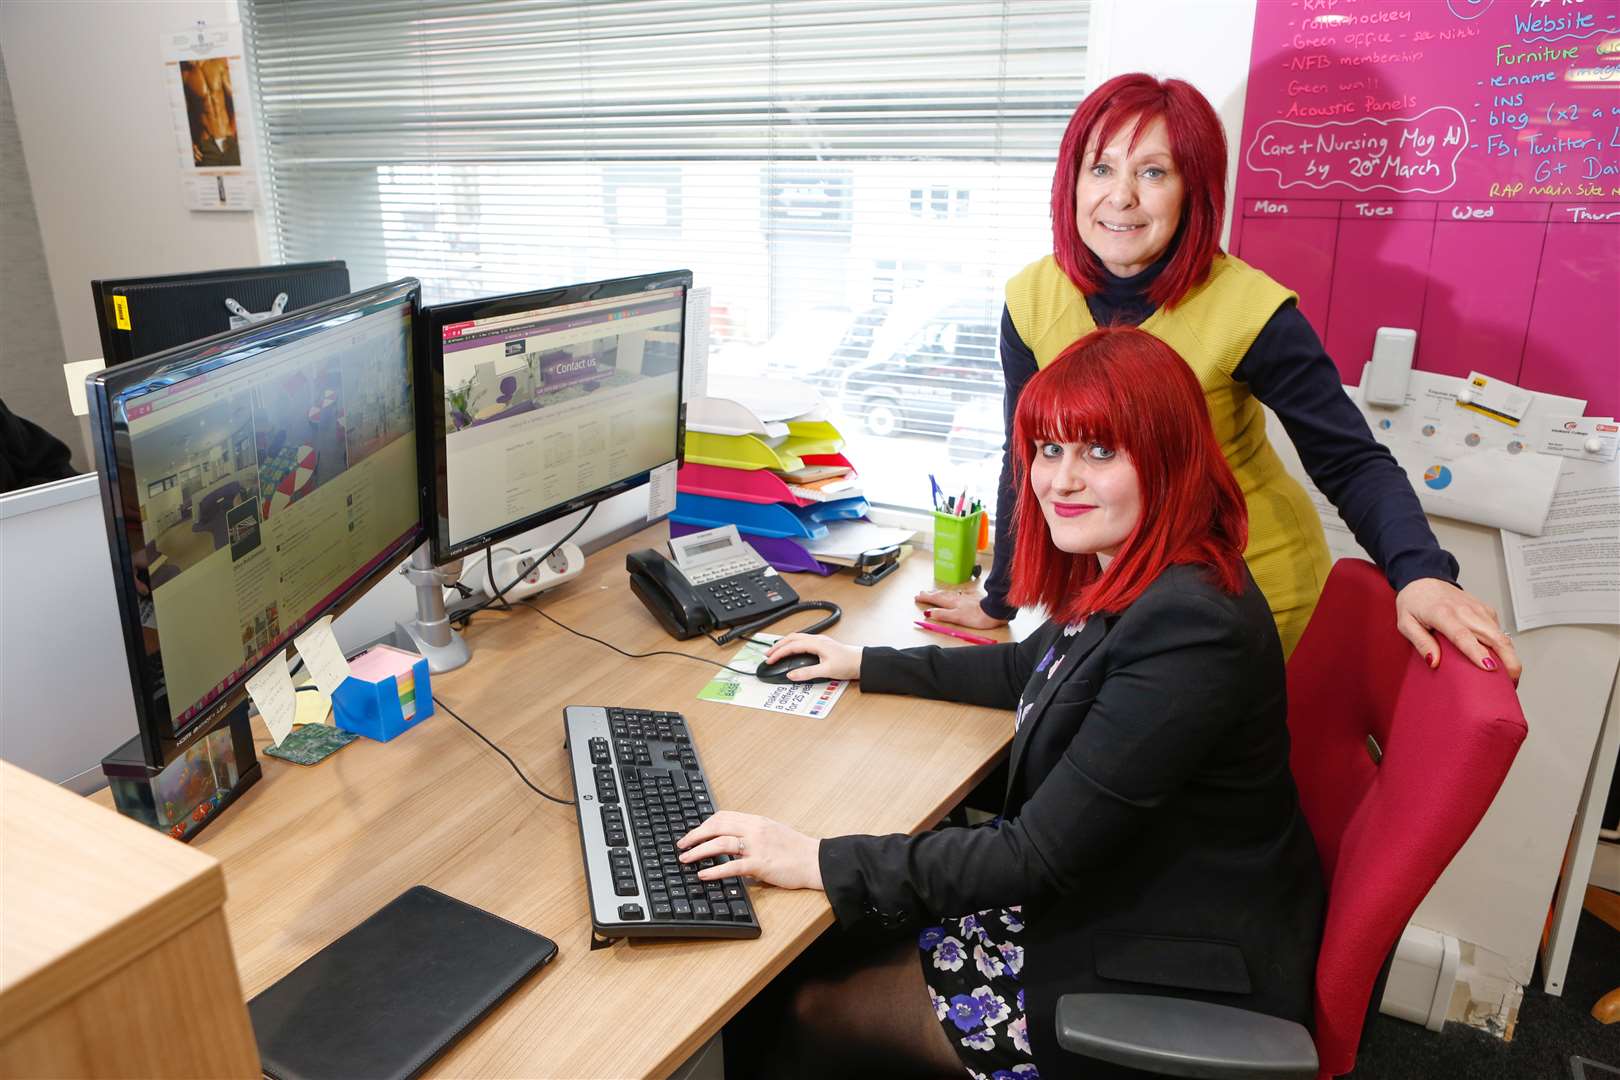 RAP Interiors marketing and social media manager Emily Lamb and director Julie Anderson, above